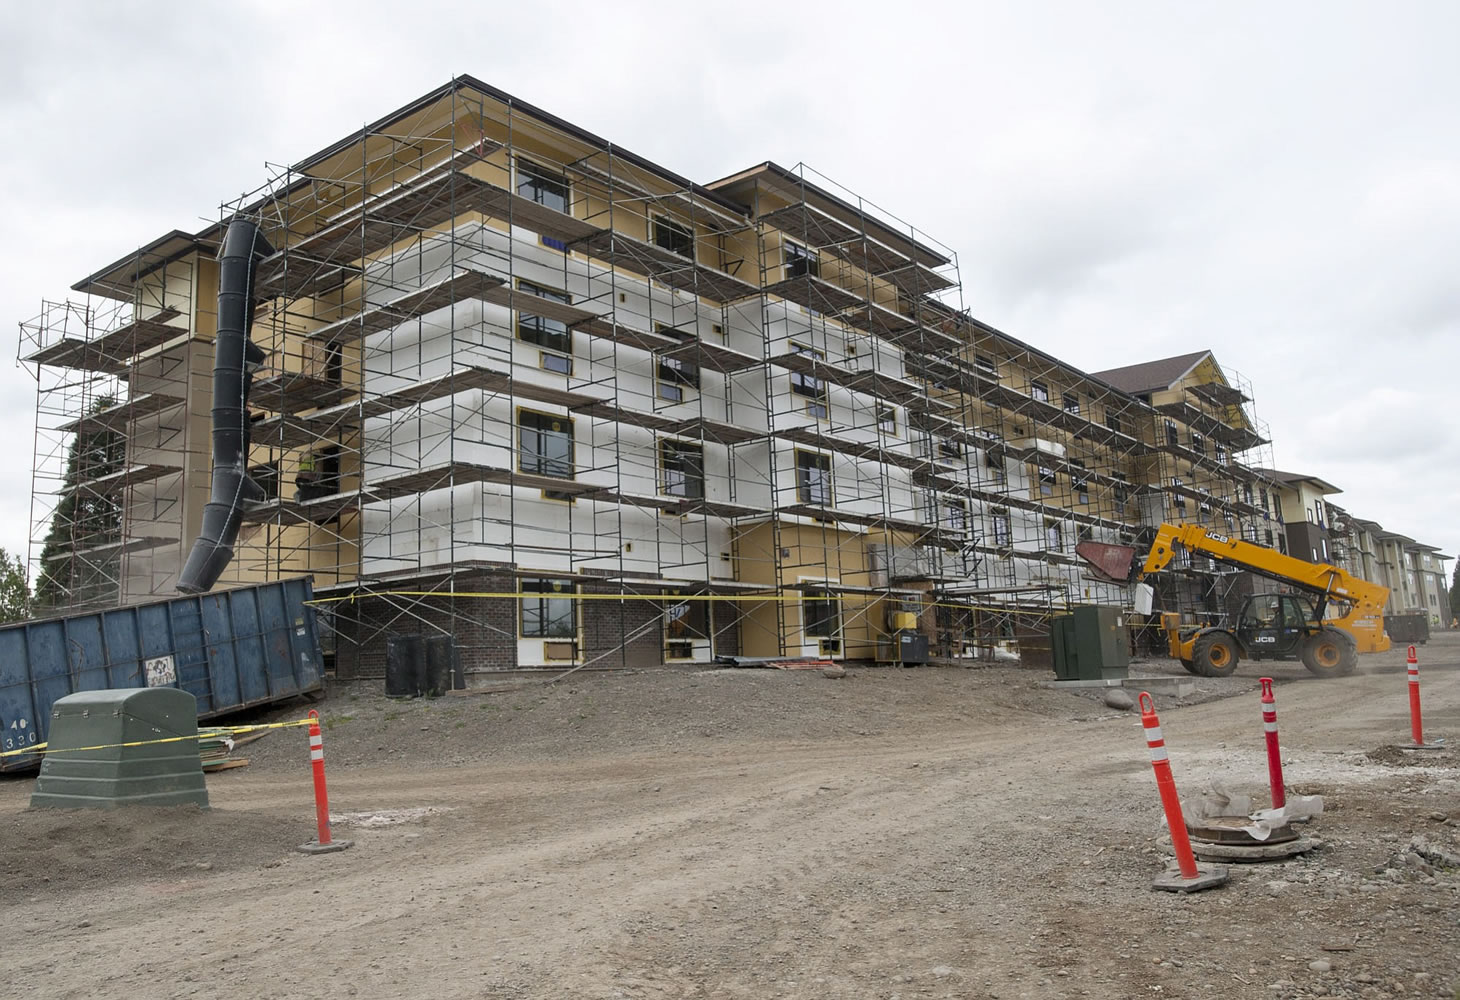 Work is nearing completion at the TownePlace Suites by Marriott, an extended-stay hotel with 115 guest rooms.